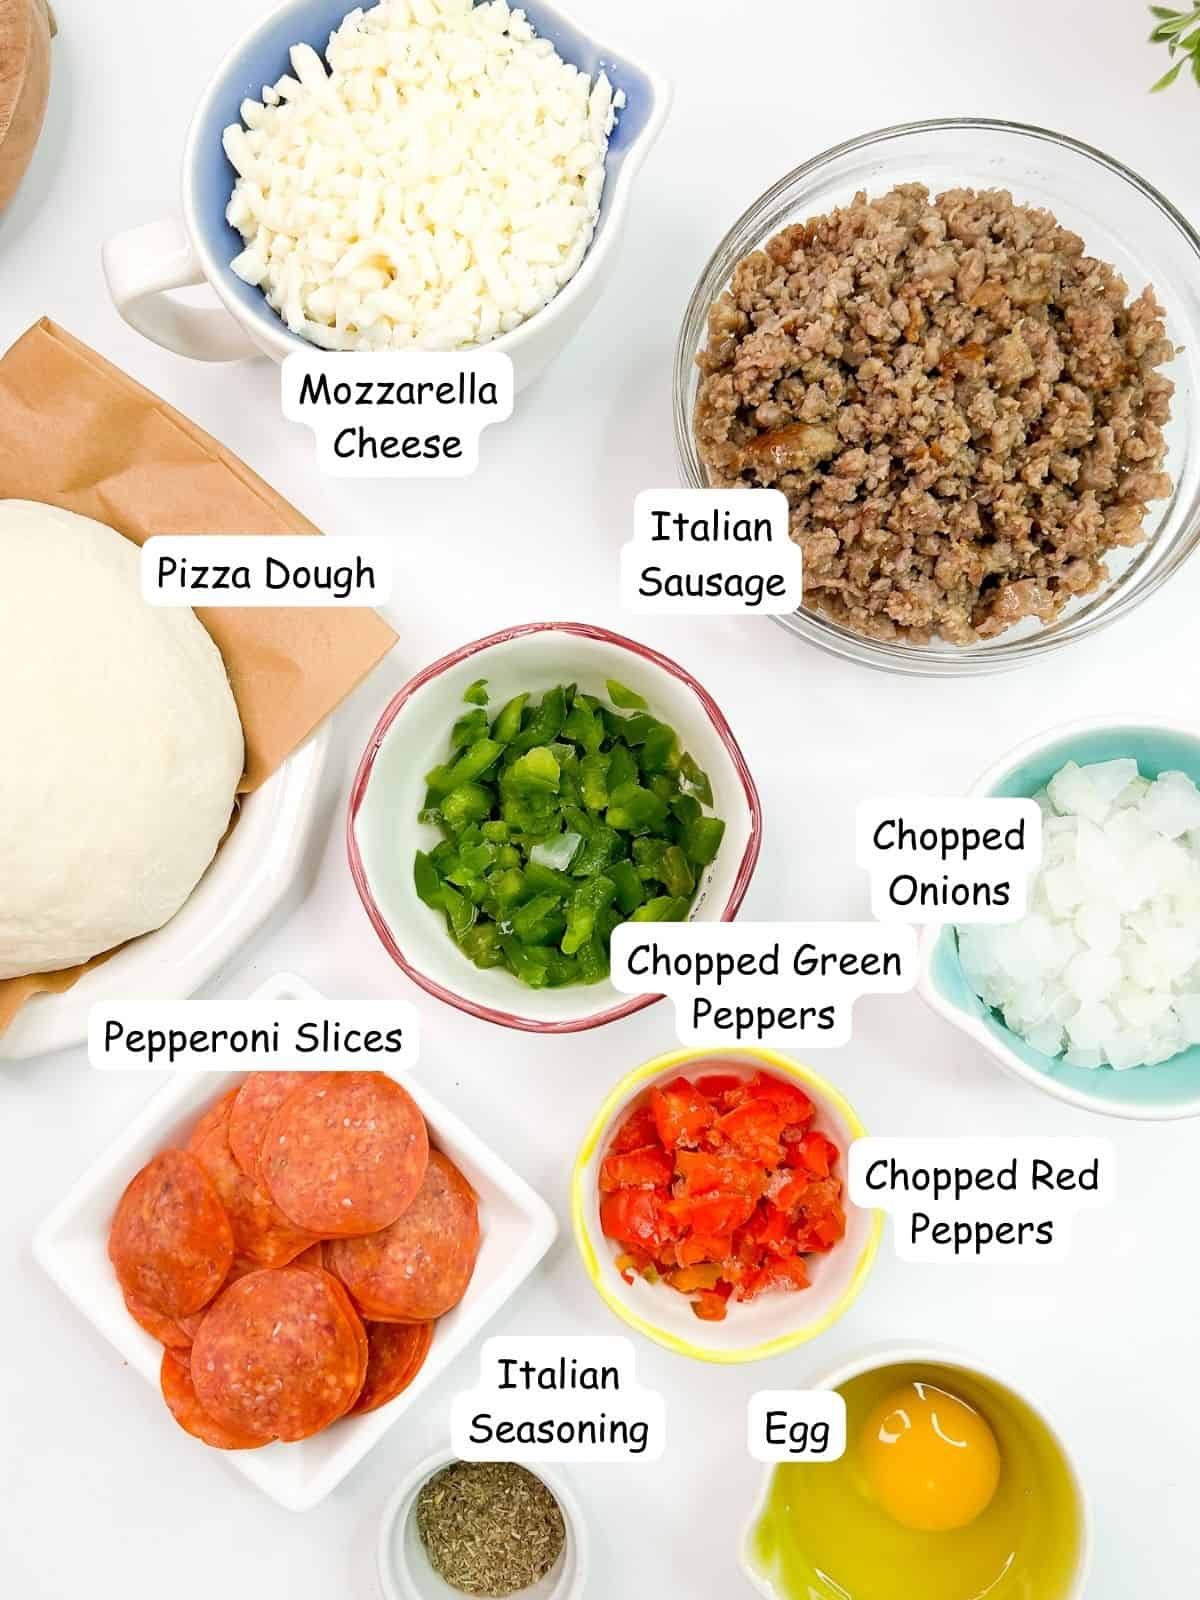 Ingredients: Italian sausage, pepperoni, Italian sausage, red, green peppers, onions, pizza dough, mozzarella cheese.